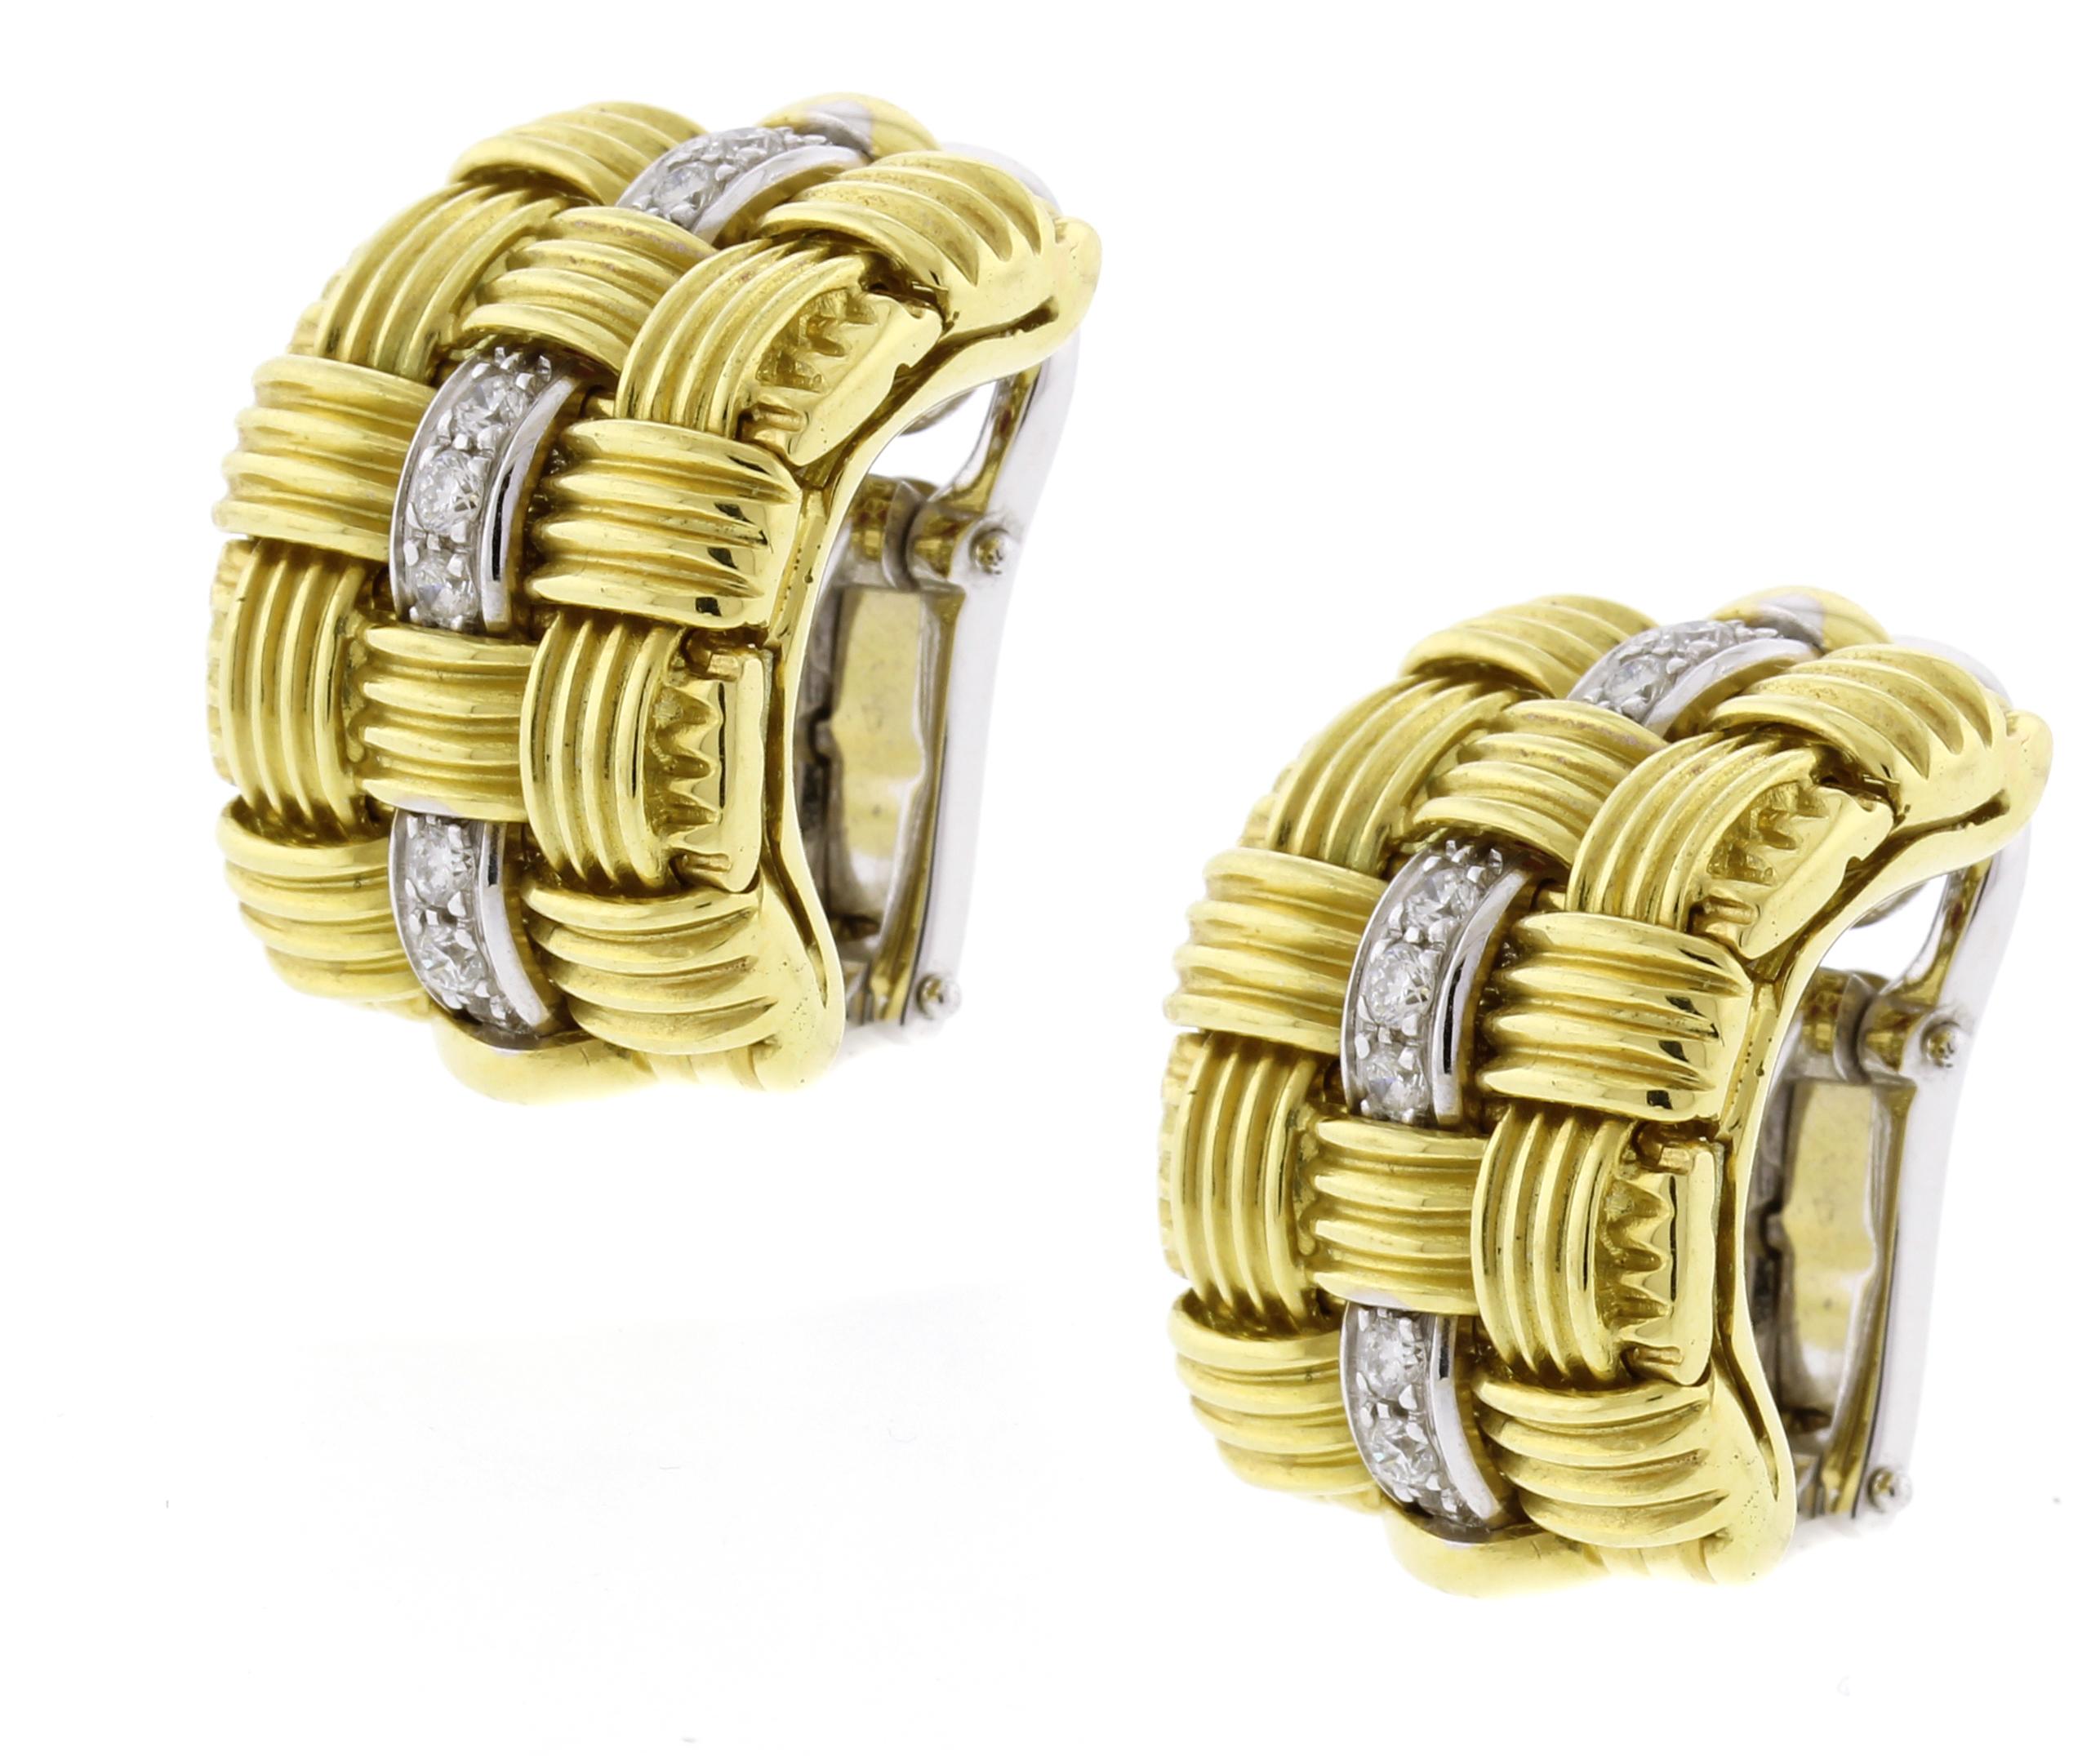 Women's or Men's Roberto Coin Appassionata Earrings with Diamonds